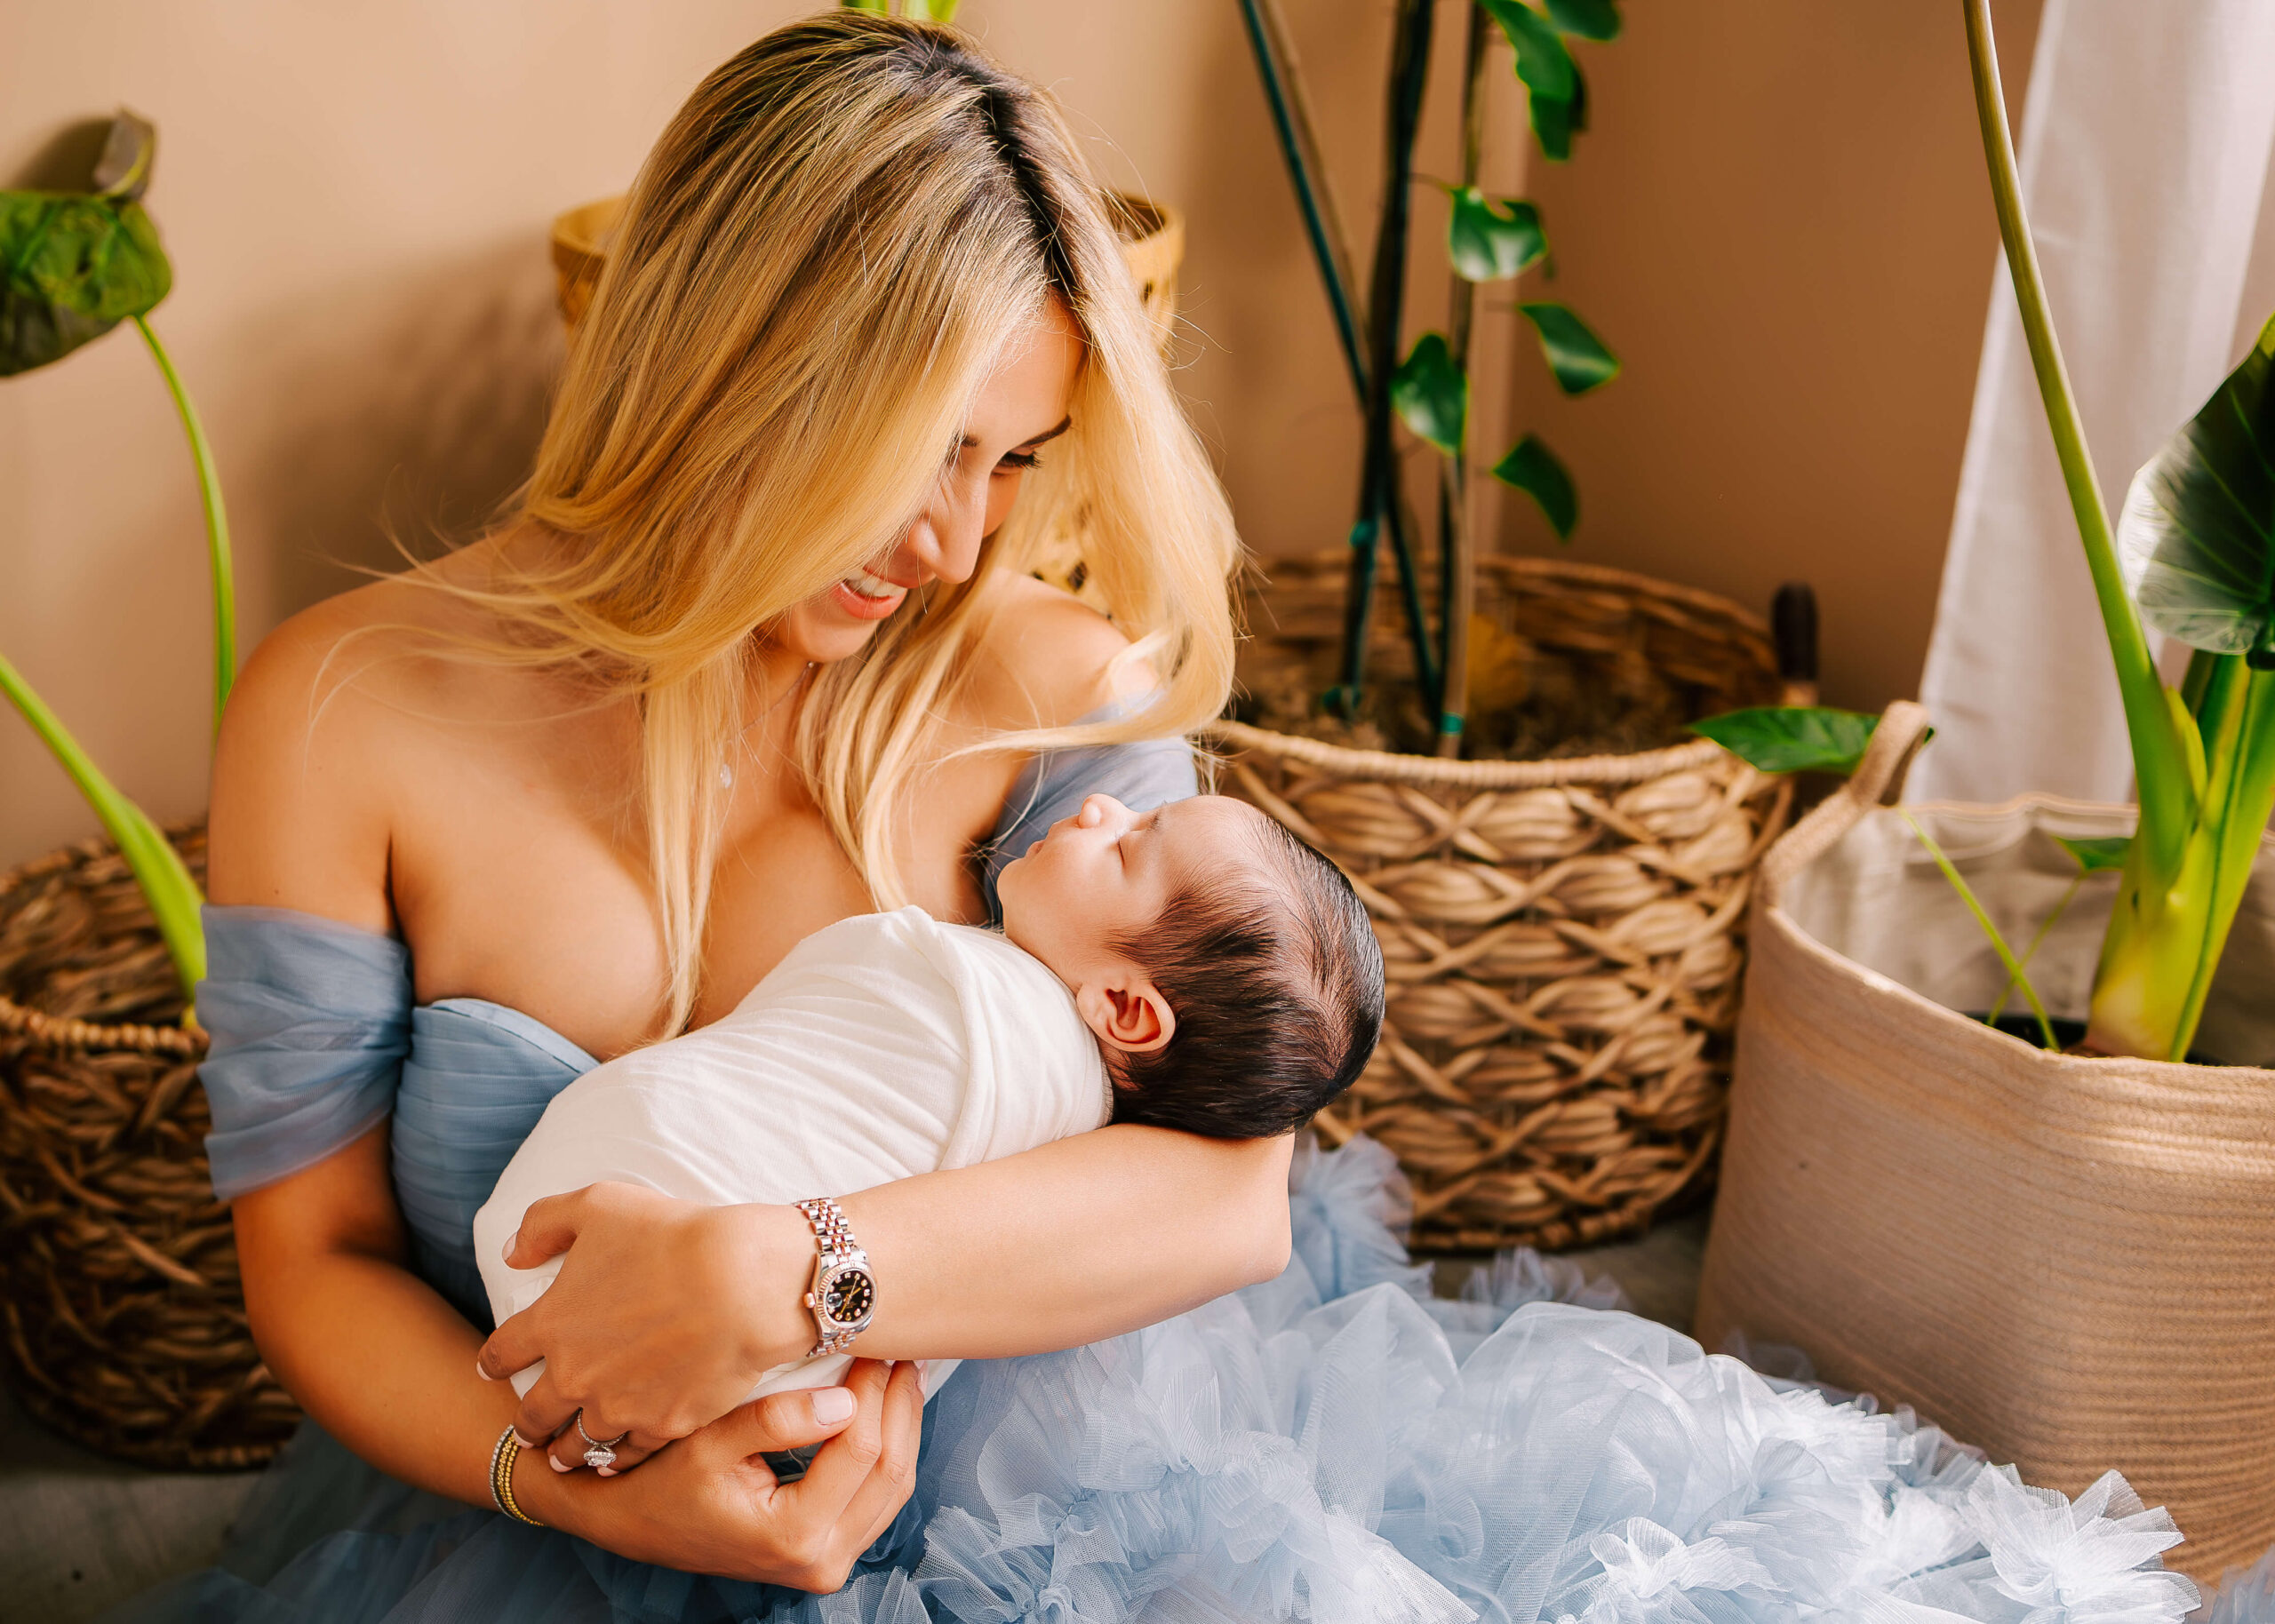 Mom sitting on floor next to bed snuggling her baby during newborn lifestyle session in Orange County CA studio by Ashley Nicole.